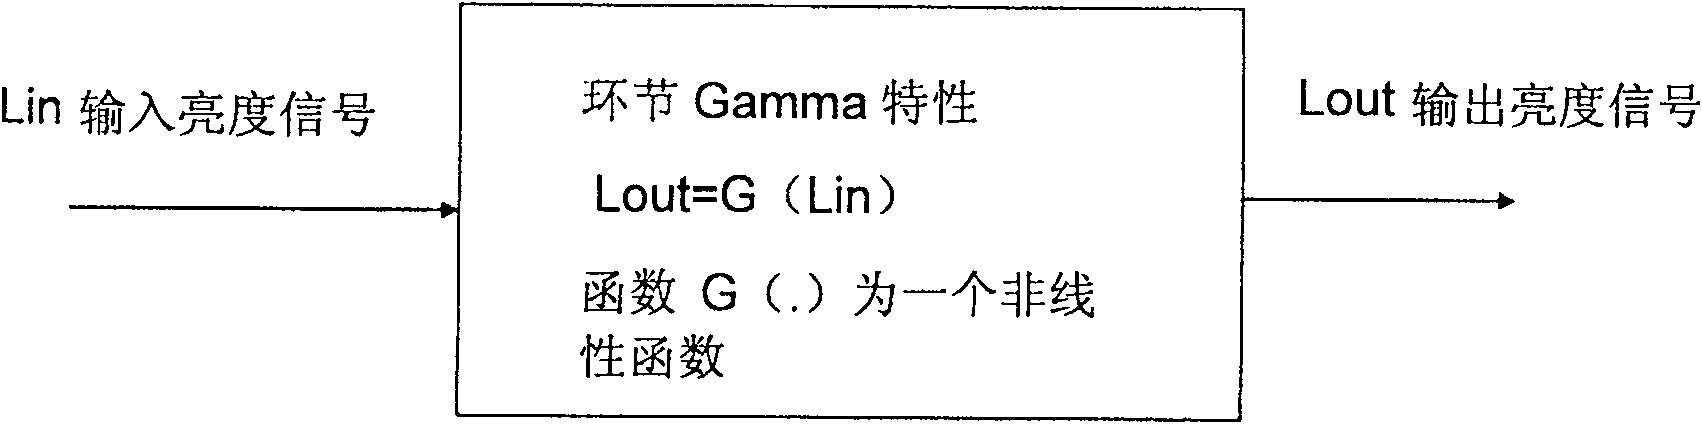 Method and apparatus for emending gamma characteristic of video display equipment in video communication